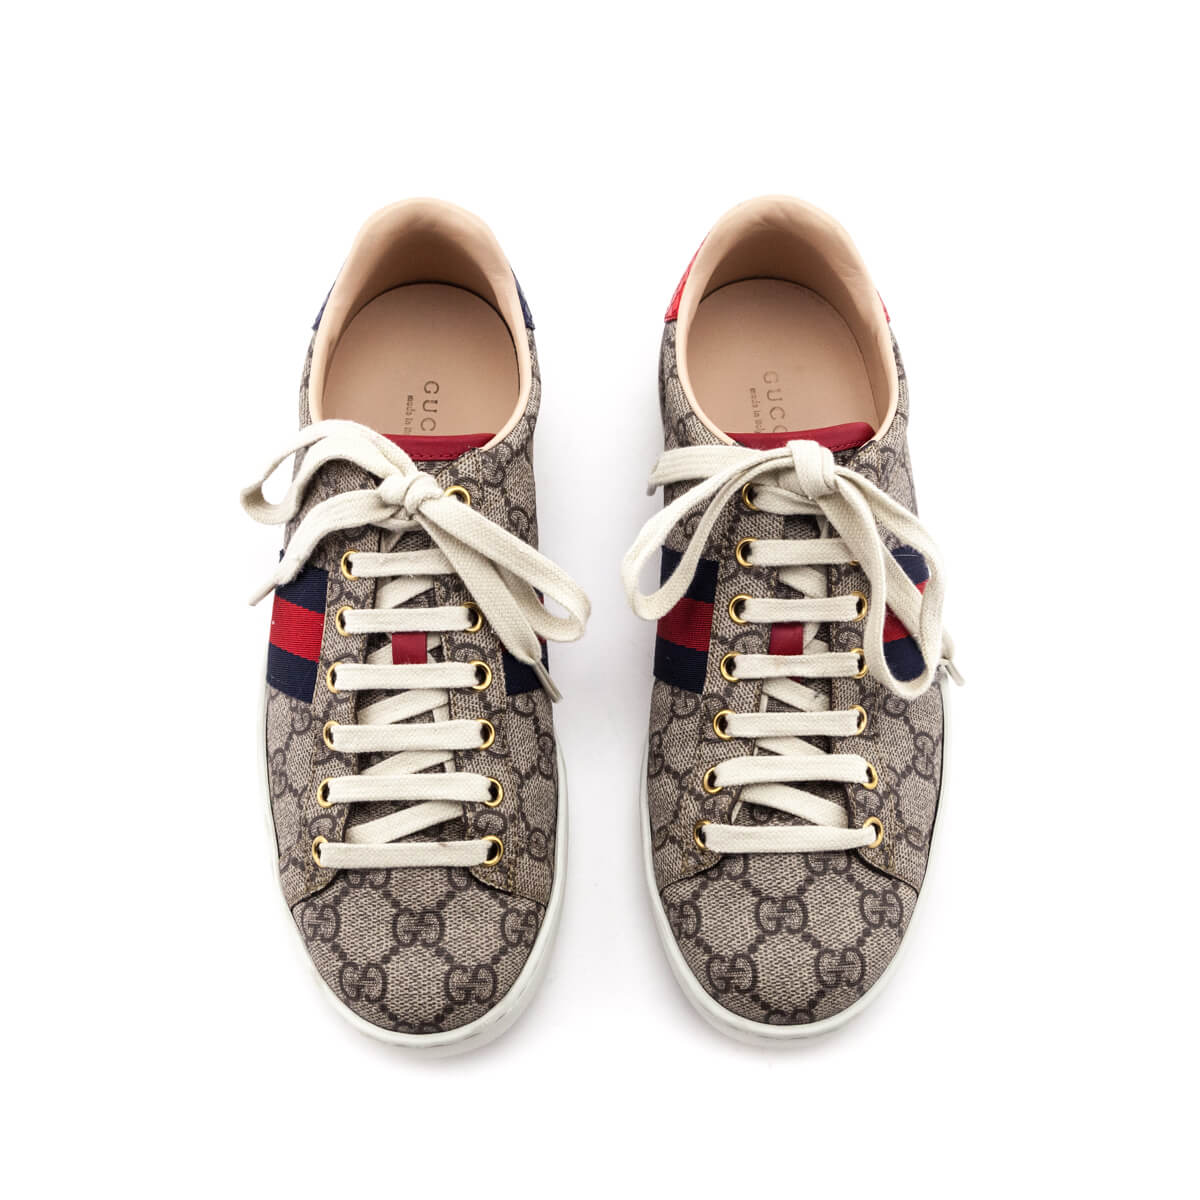 Gucci Blue & Red GG Supreme Ace Sneakers Size US 7.5 | EU 37.5 - Love that Bag etc - Preowned Authentic Designer Handbags & Preloved Fashions